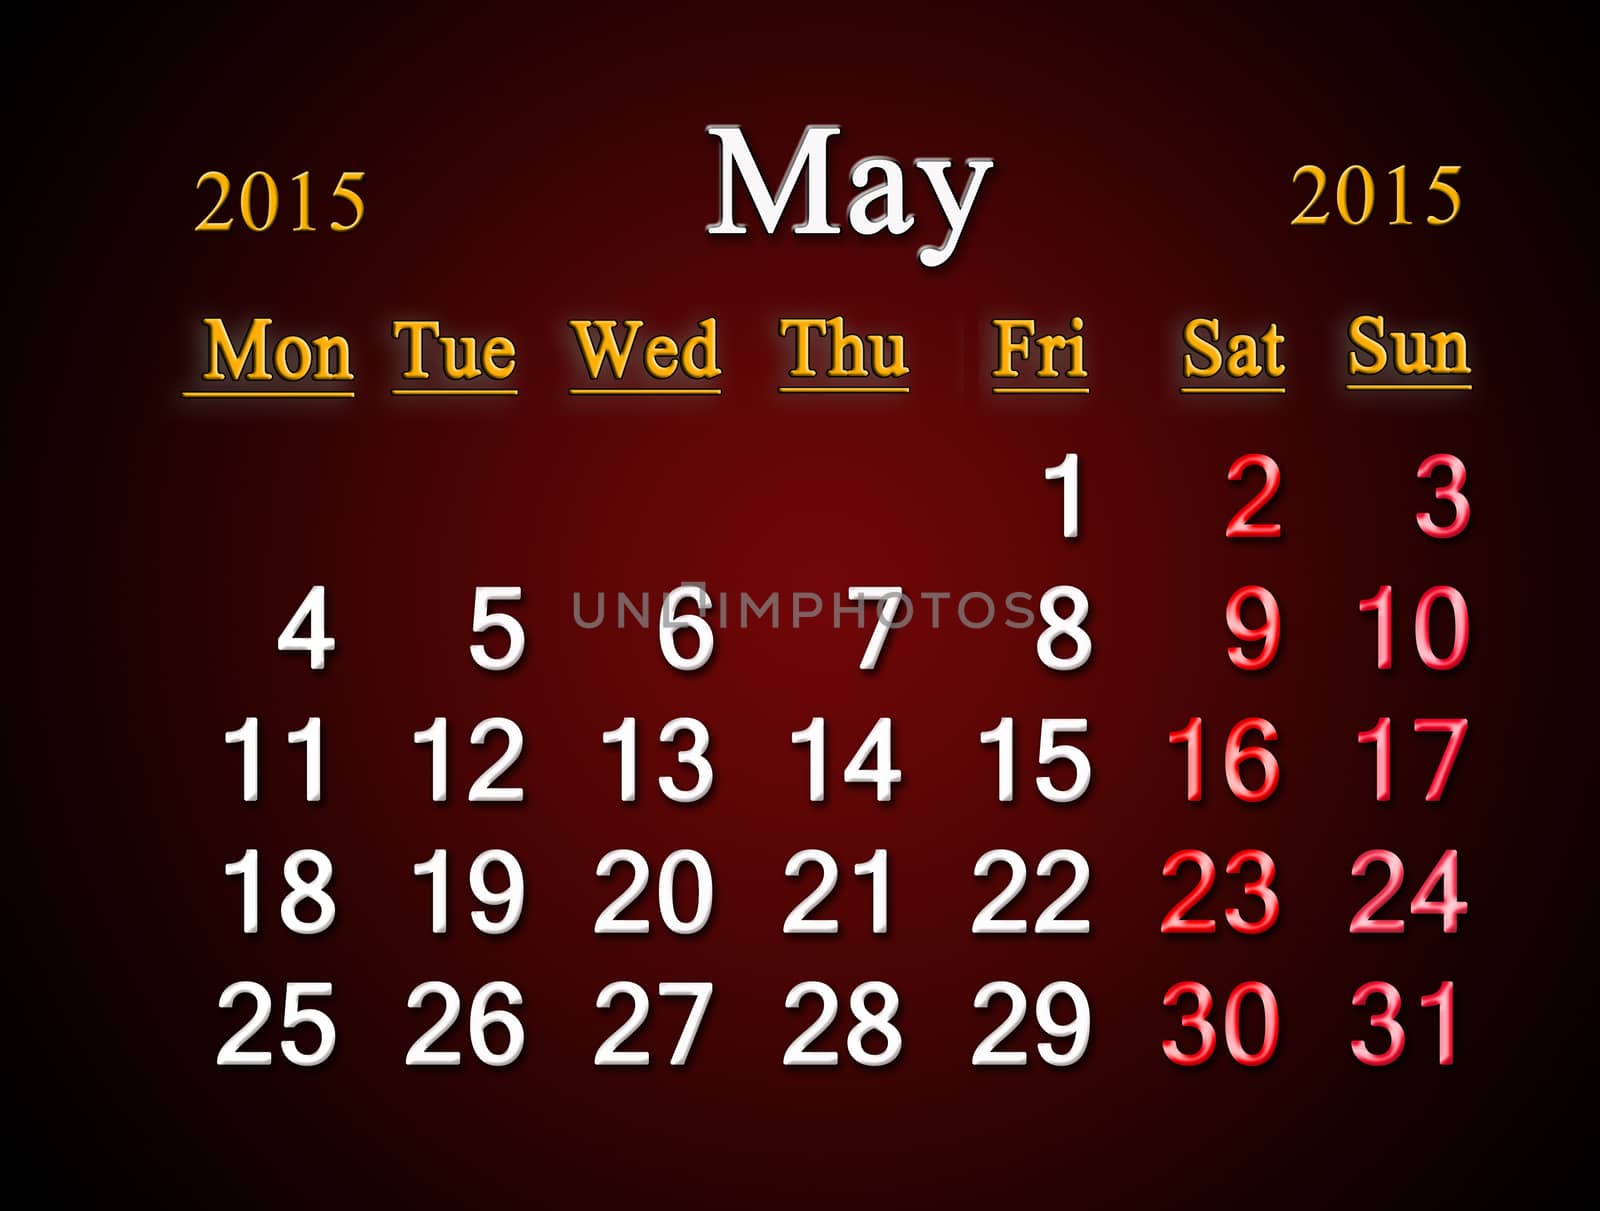 beautiful claret calendar on the May of 2015 year